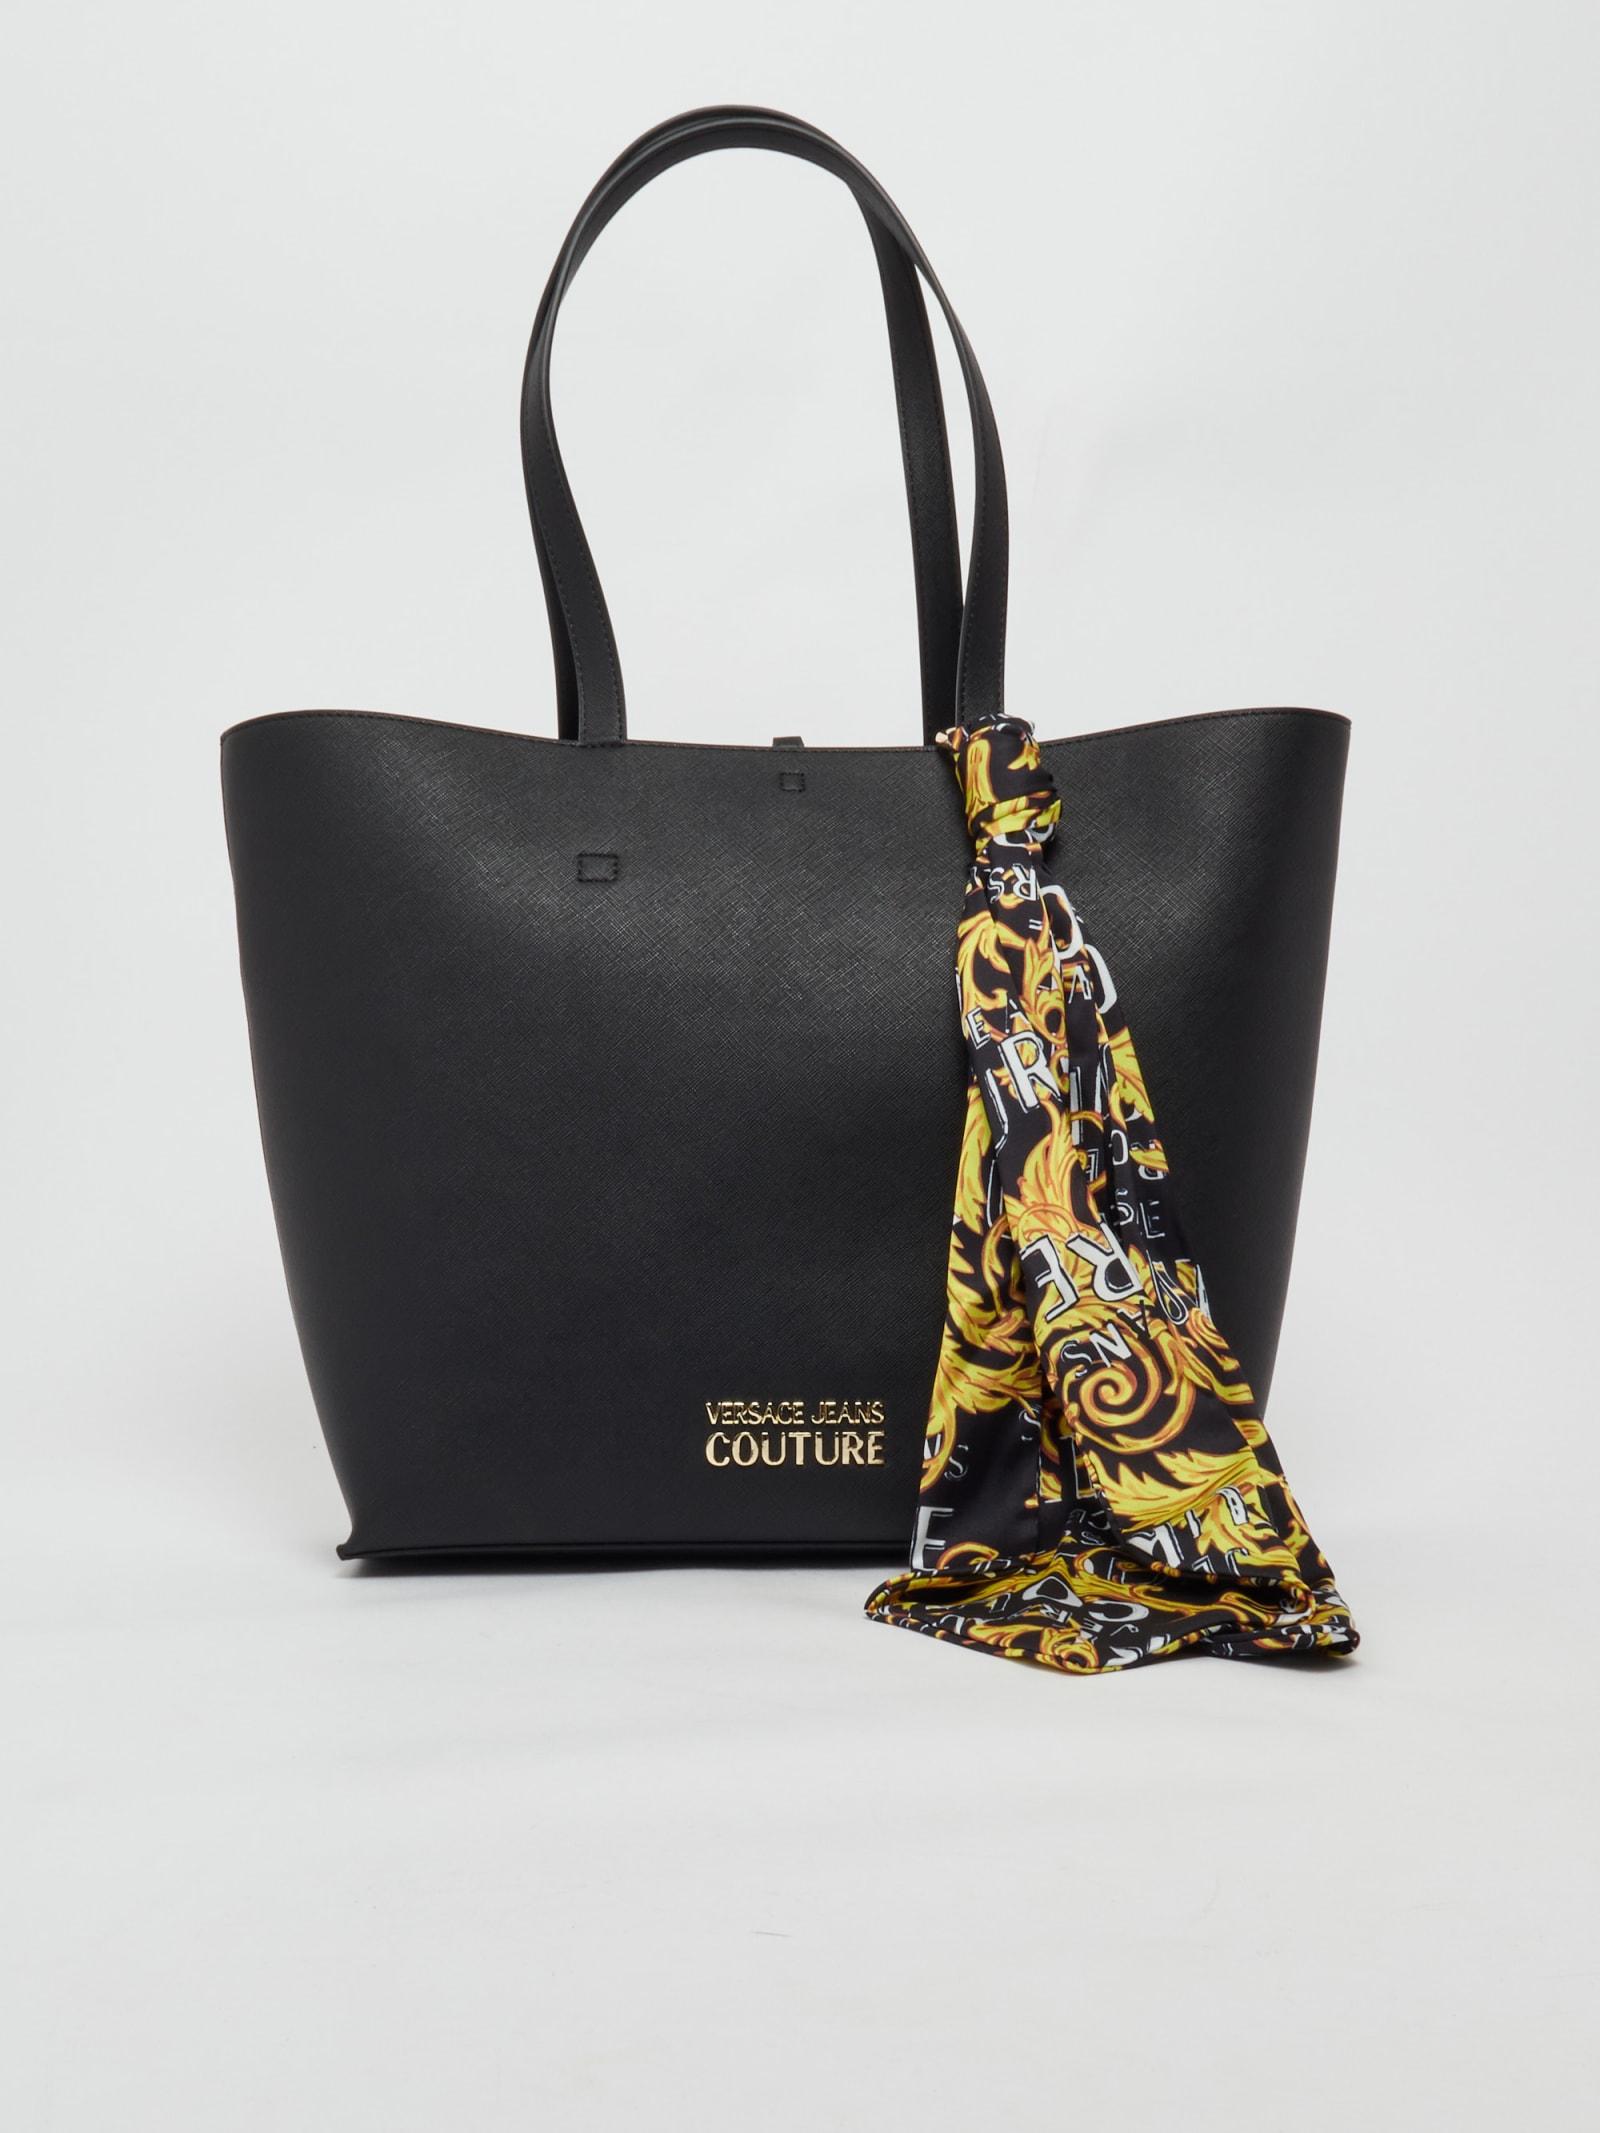 Versace Jeans Couture Range A Thelma Shopping Bag in Black | Lyst